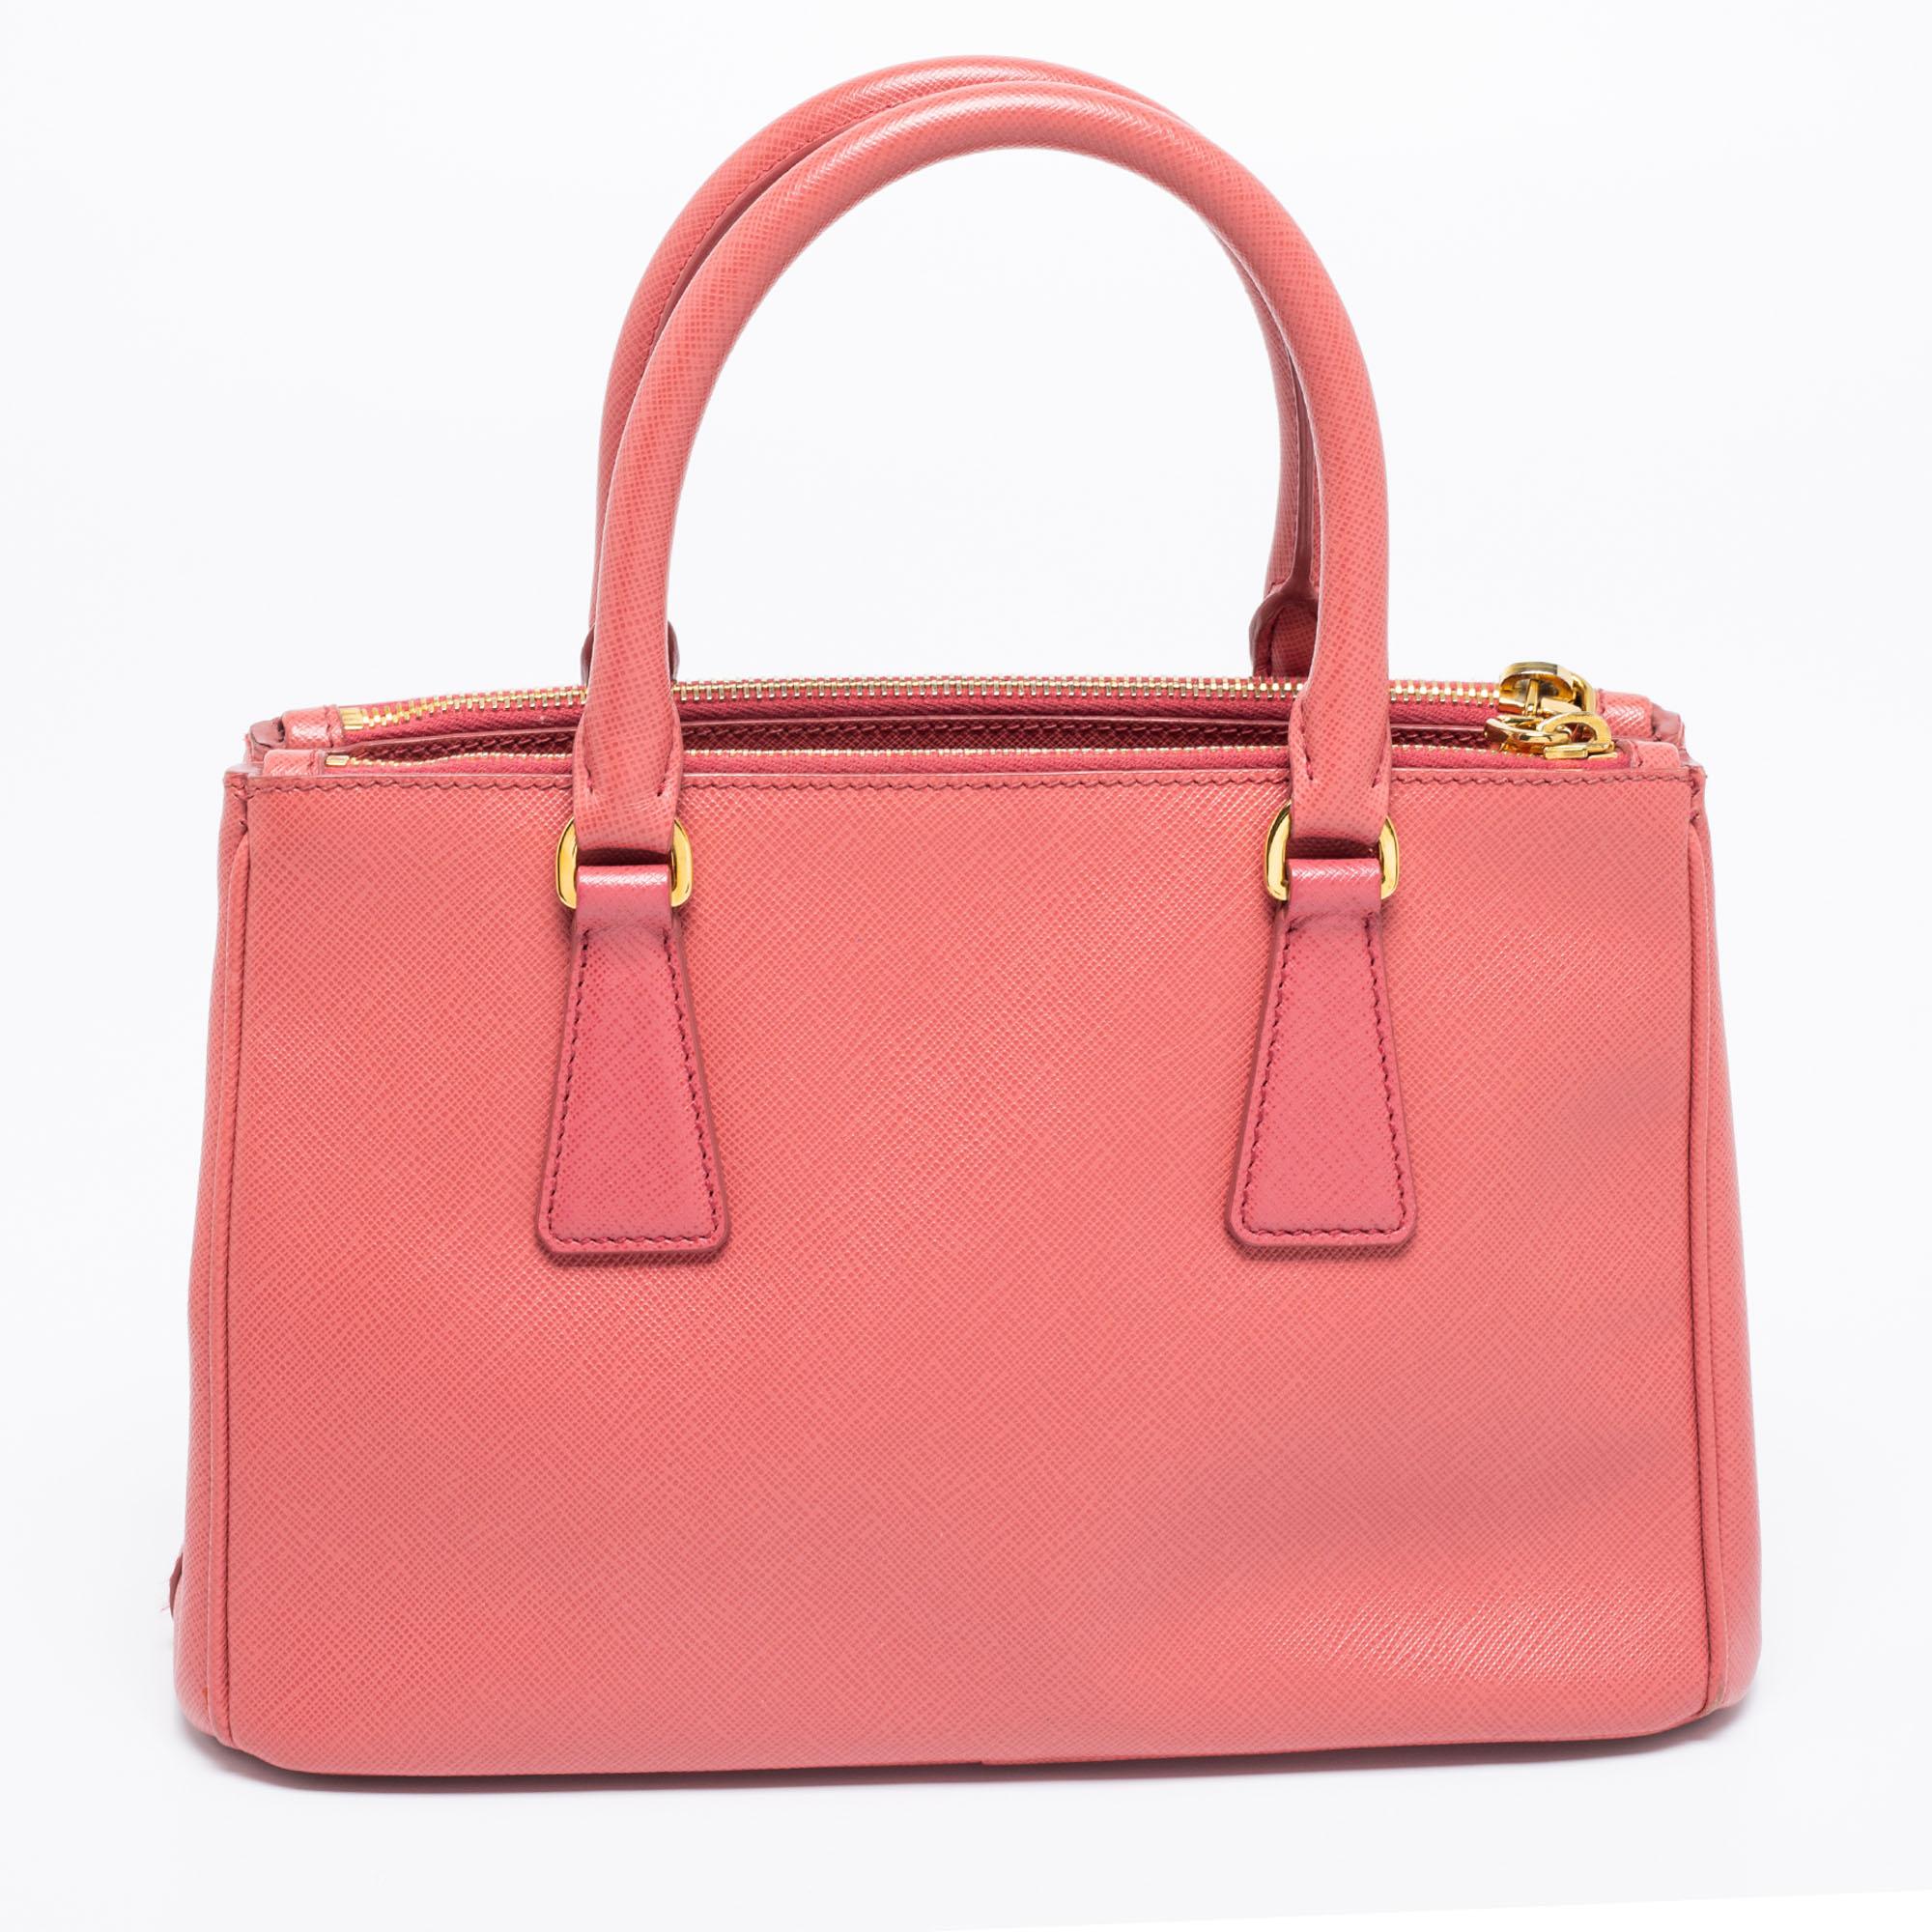 Loved for its classic appeal and functional design, this is one of the most iconic and popular bags from the house of Prada. This beauty in pink is crafted from Saffiano leather and is equipped with two top handles, the brand logo on the front, and